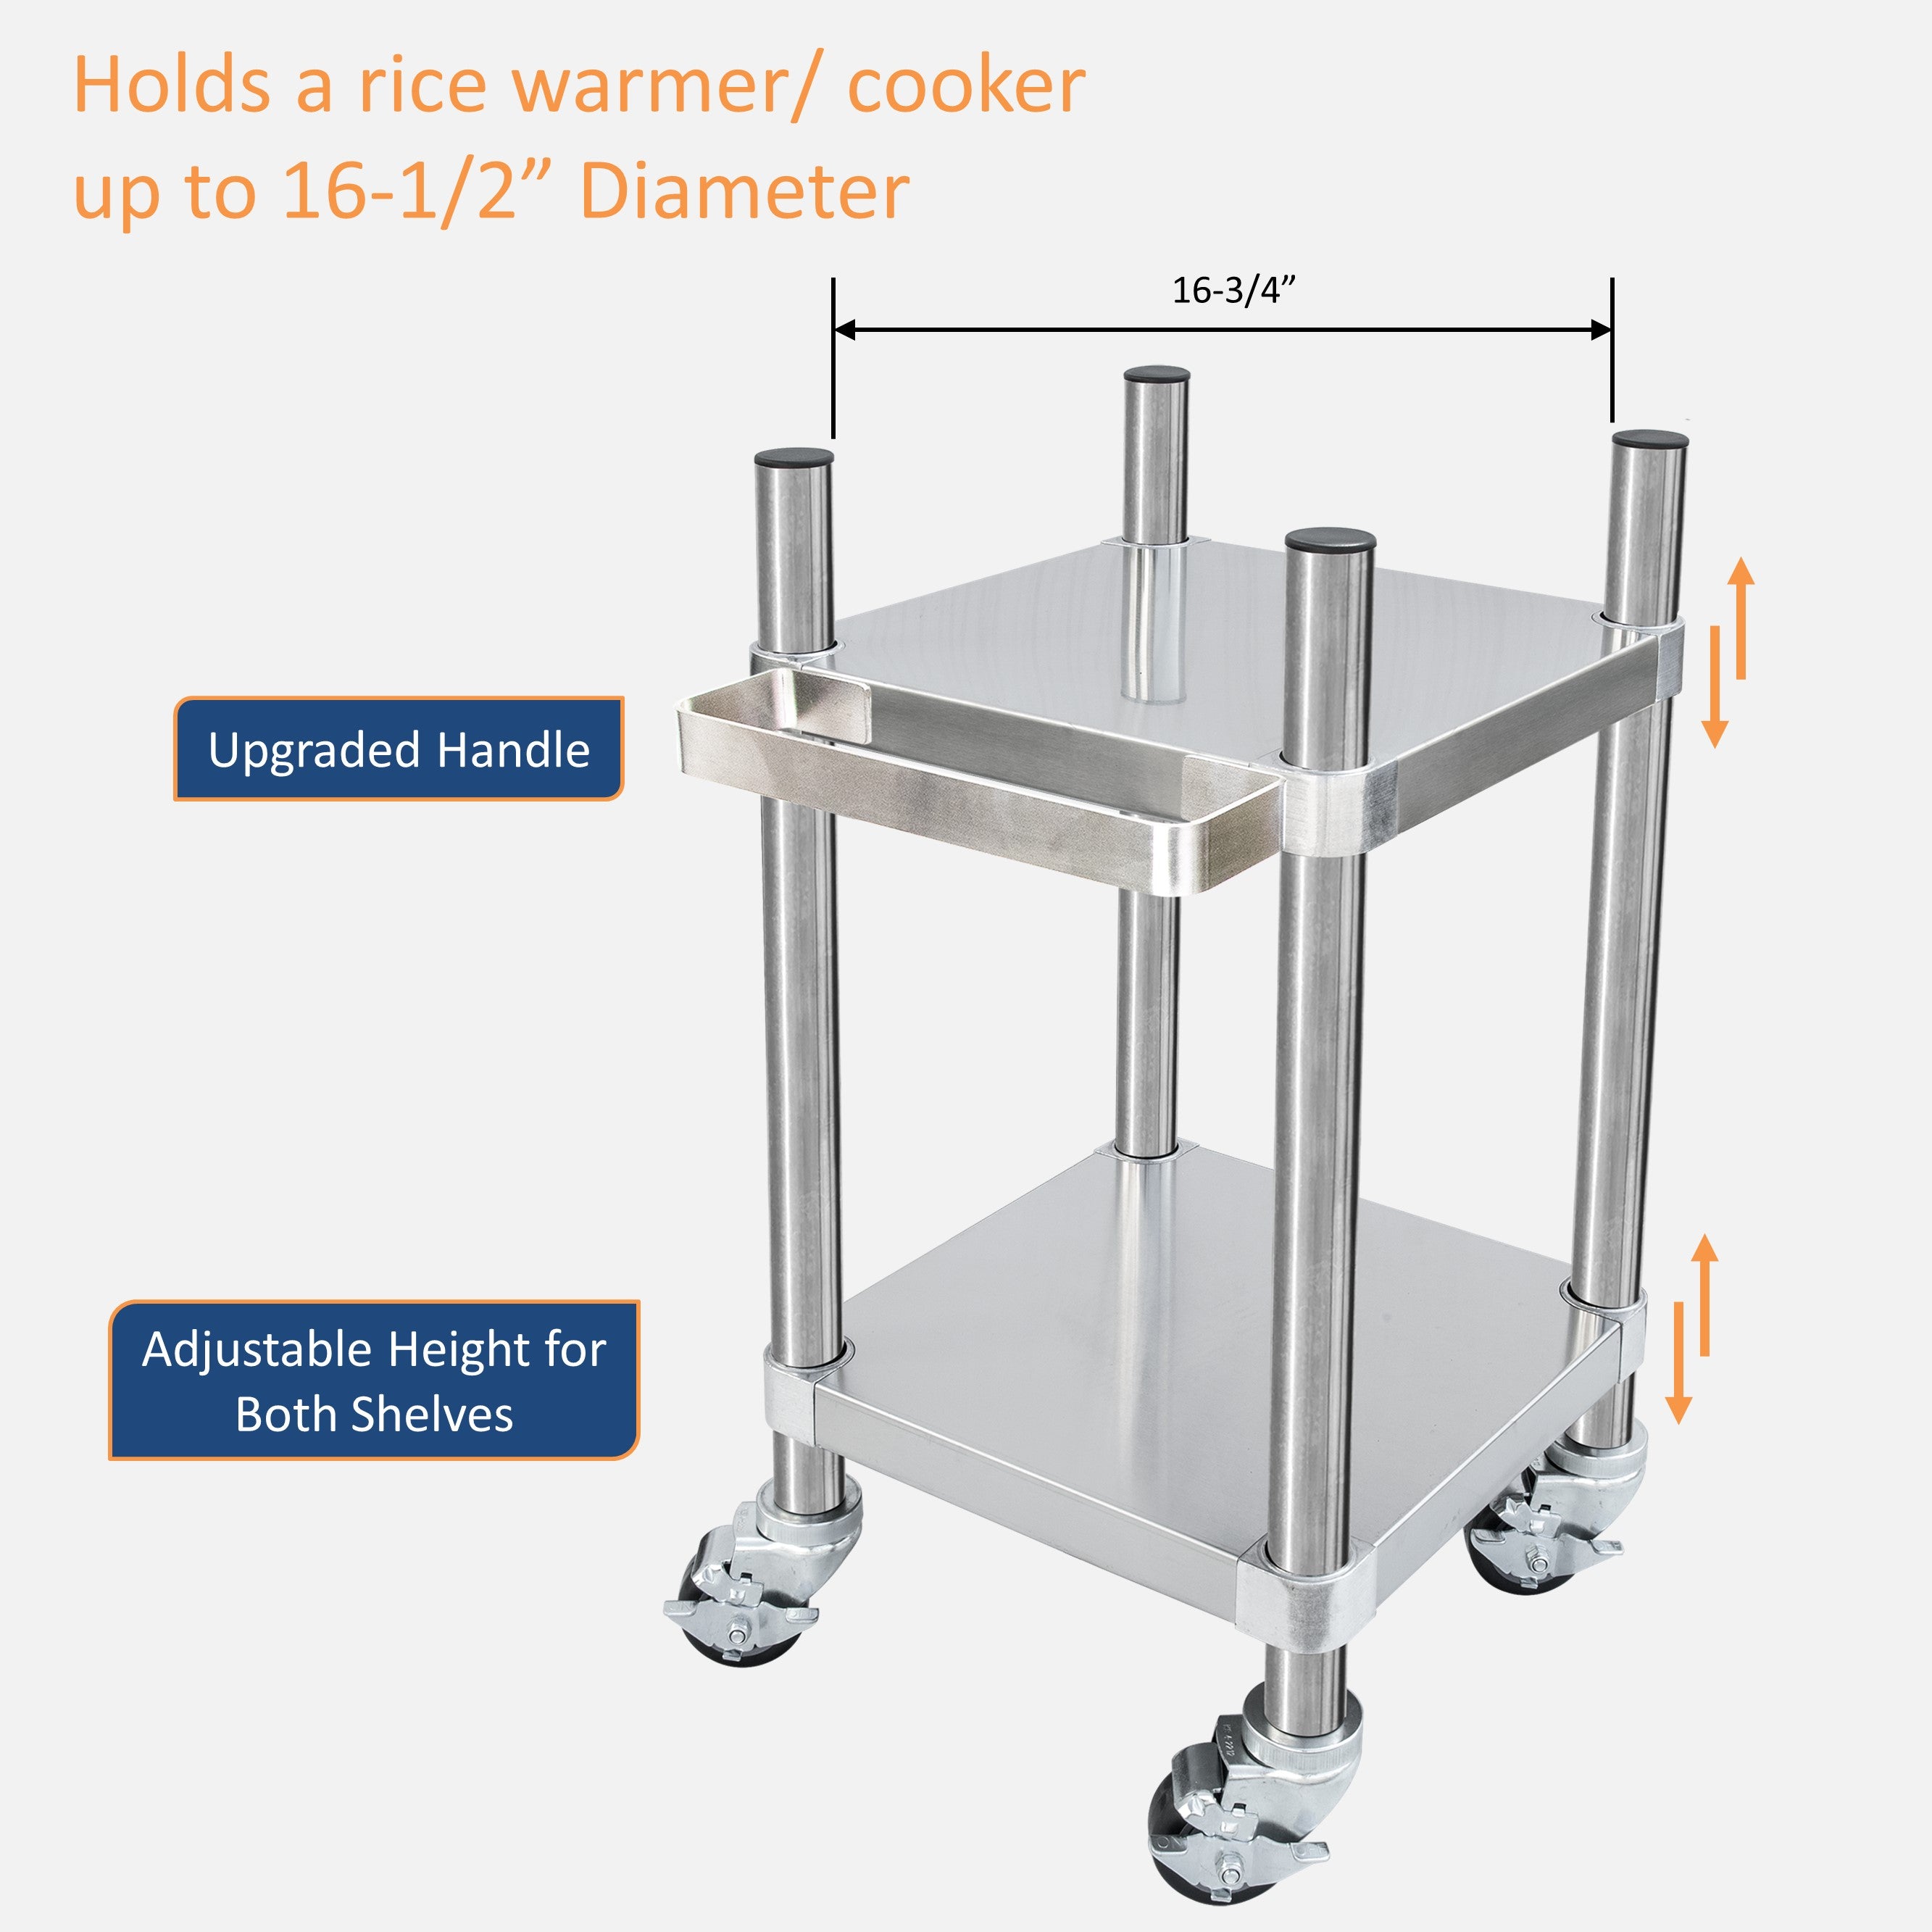 GSW Stainless Steel Top Rice Warmer Cart, 15" x 15" x 32"